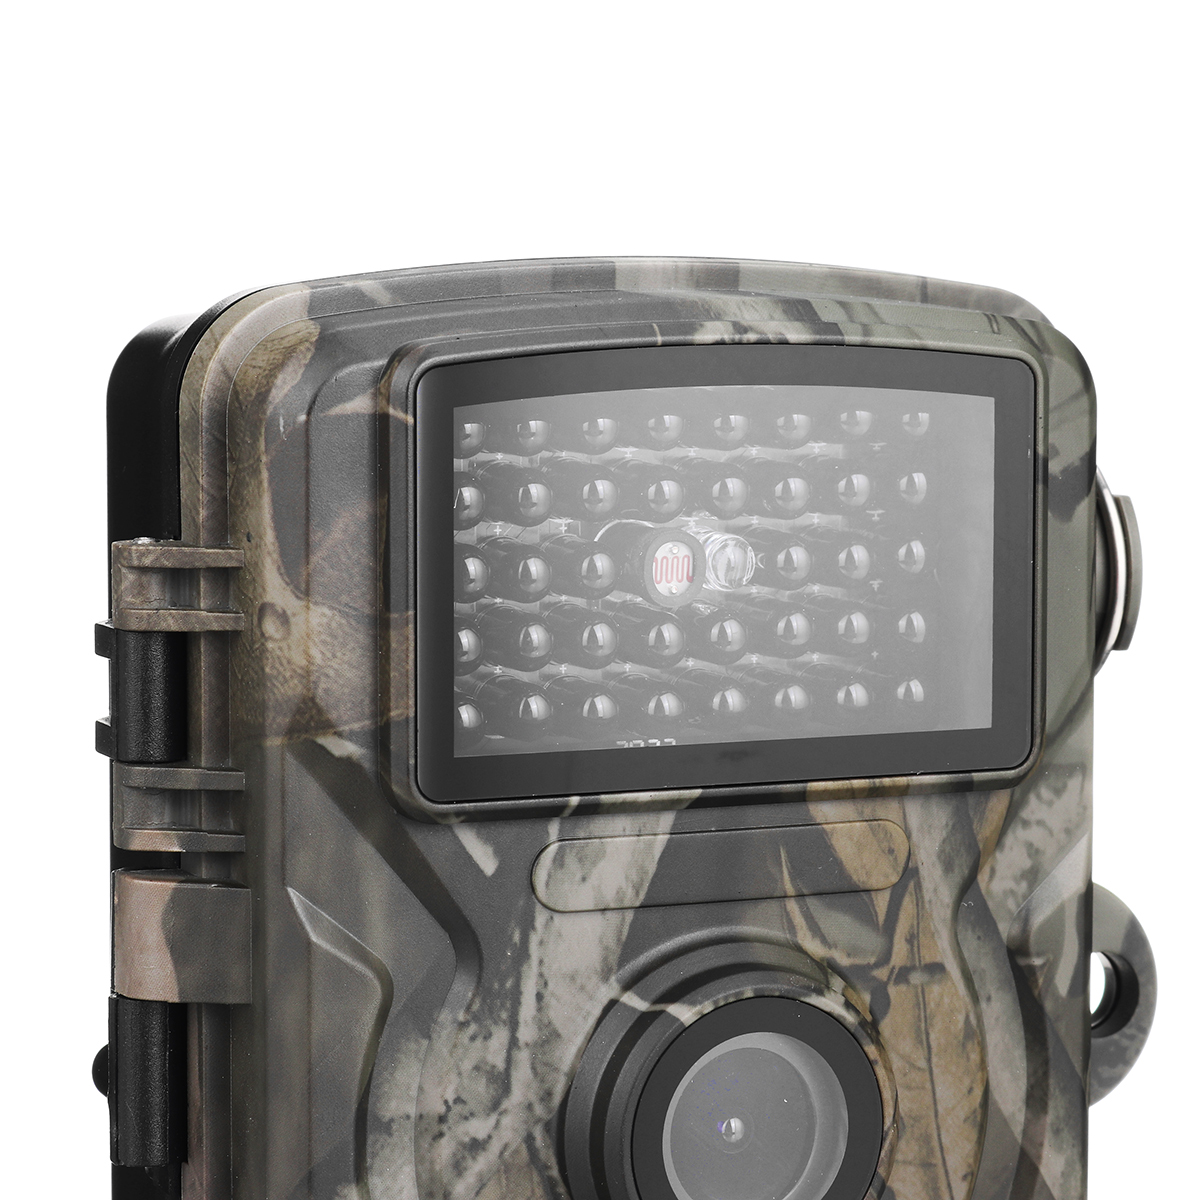 Find DL001 16MP 1080P HD 2 inch Screen Hunting Camera IR Night Vision Waterproof Scouting Camera Monitoring Protecting Farms Safety for Sale on Gipsybee.com with cryptocurrencies